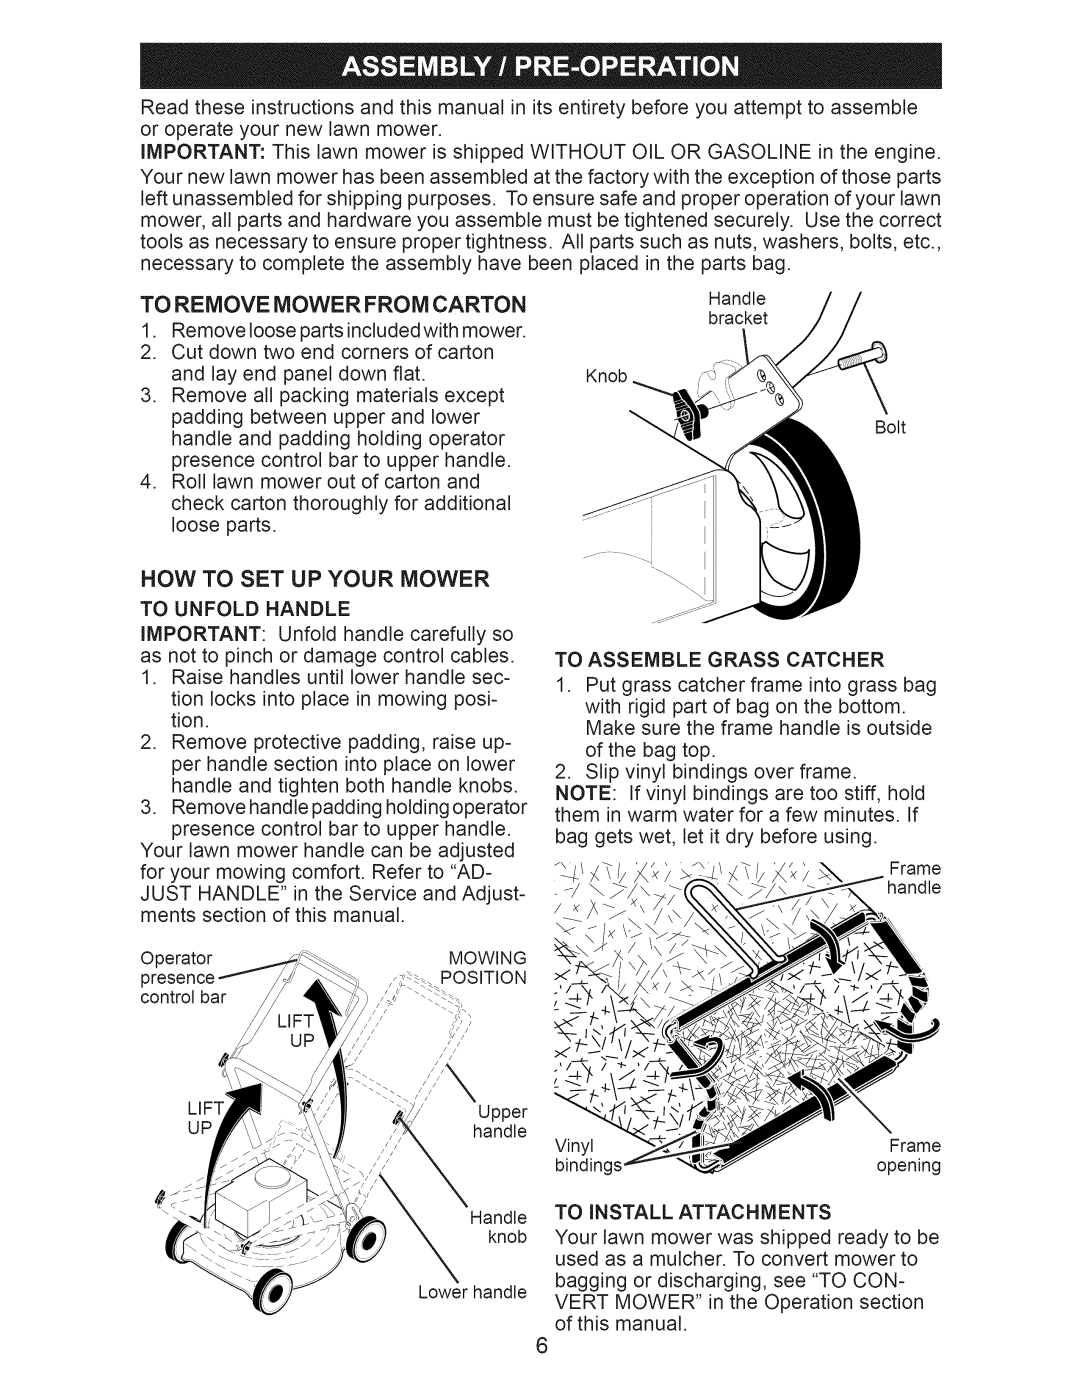 Craftsman 917.374353 owner manual To Remove Mower From Carton, Now To Set Up Your Mower 